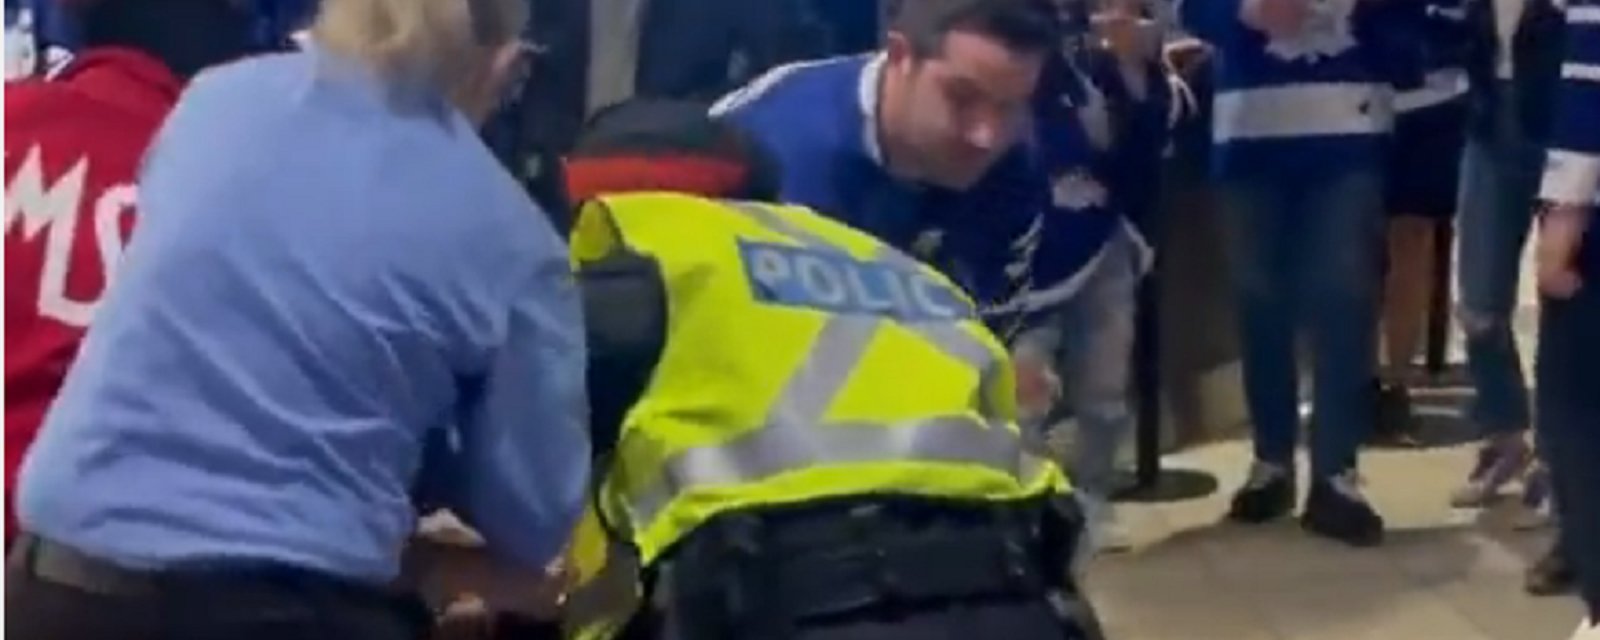 Fight breaks out after Game 7 in Toronto.